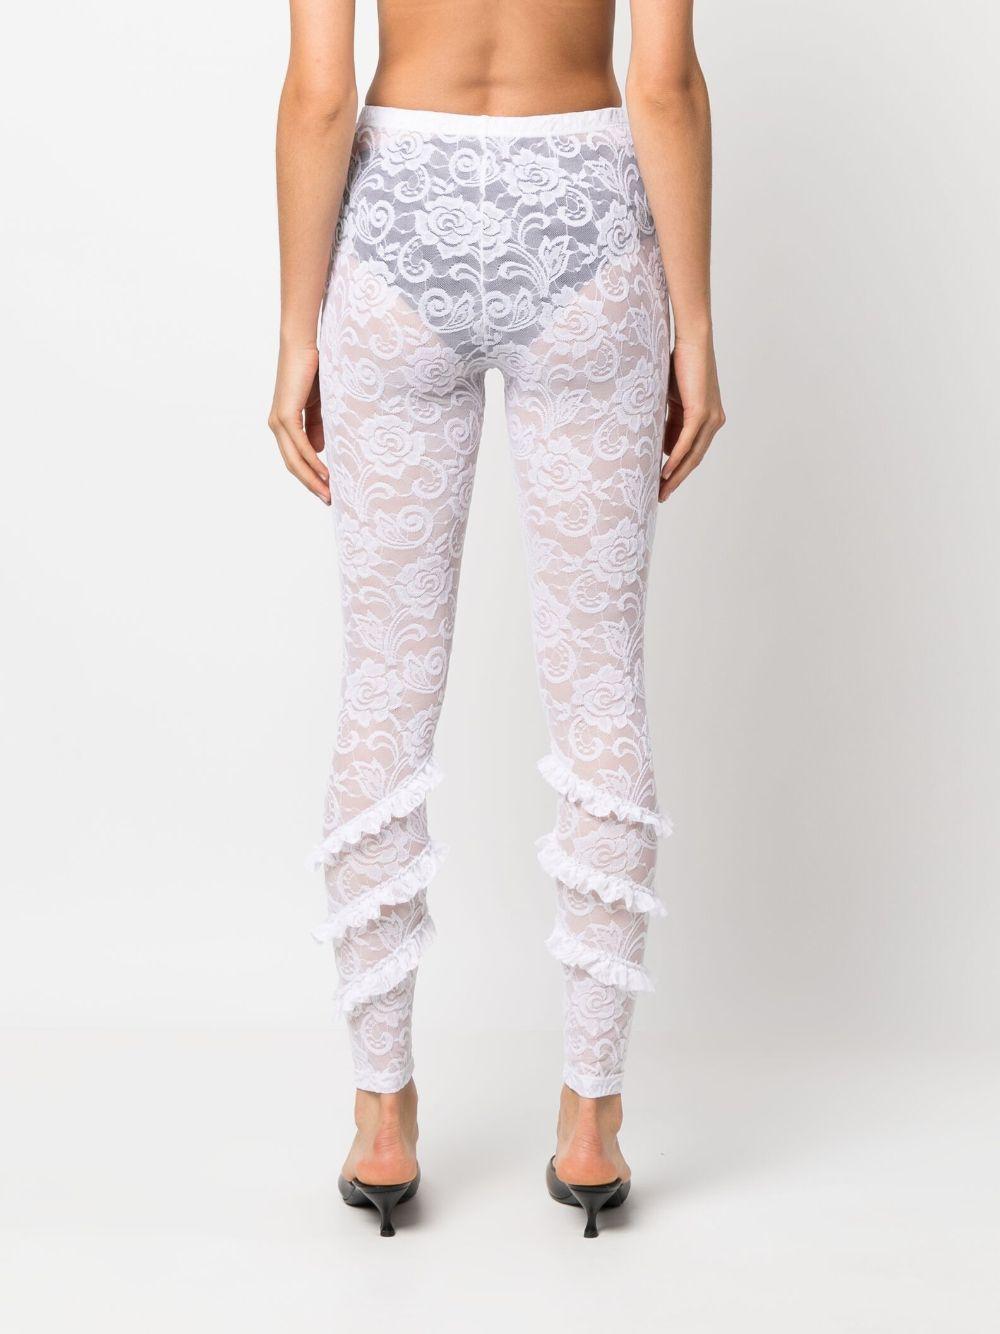 MSGM Sheer Floral Lace leggings in White | Lyst